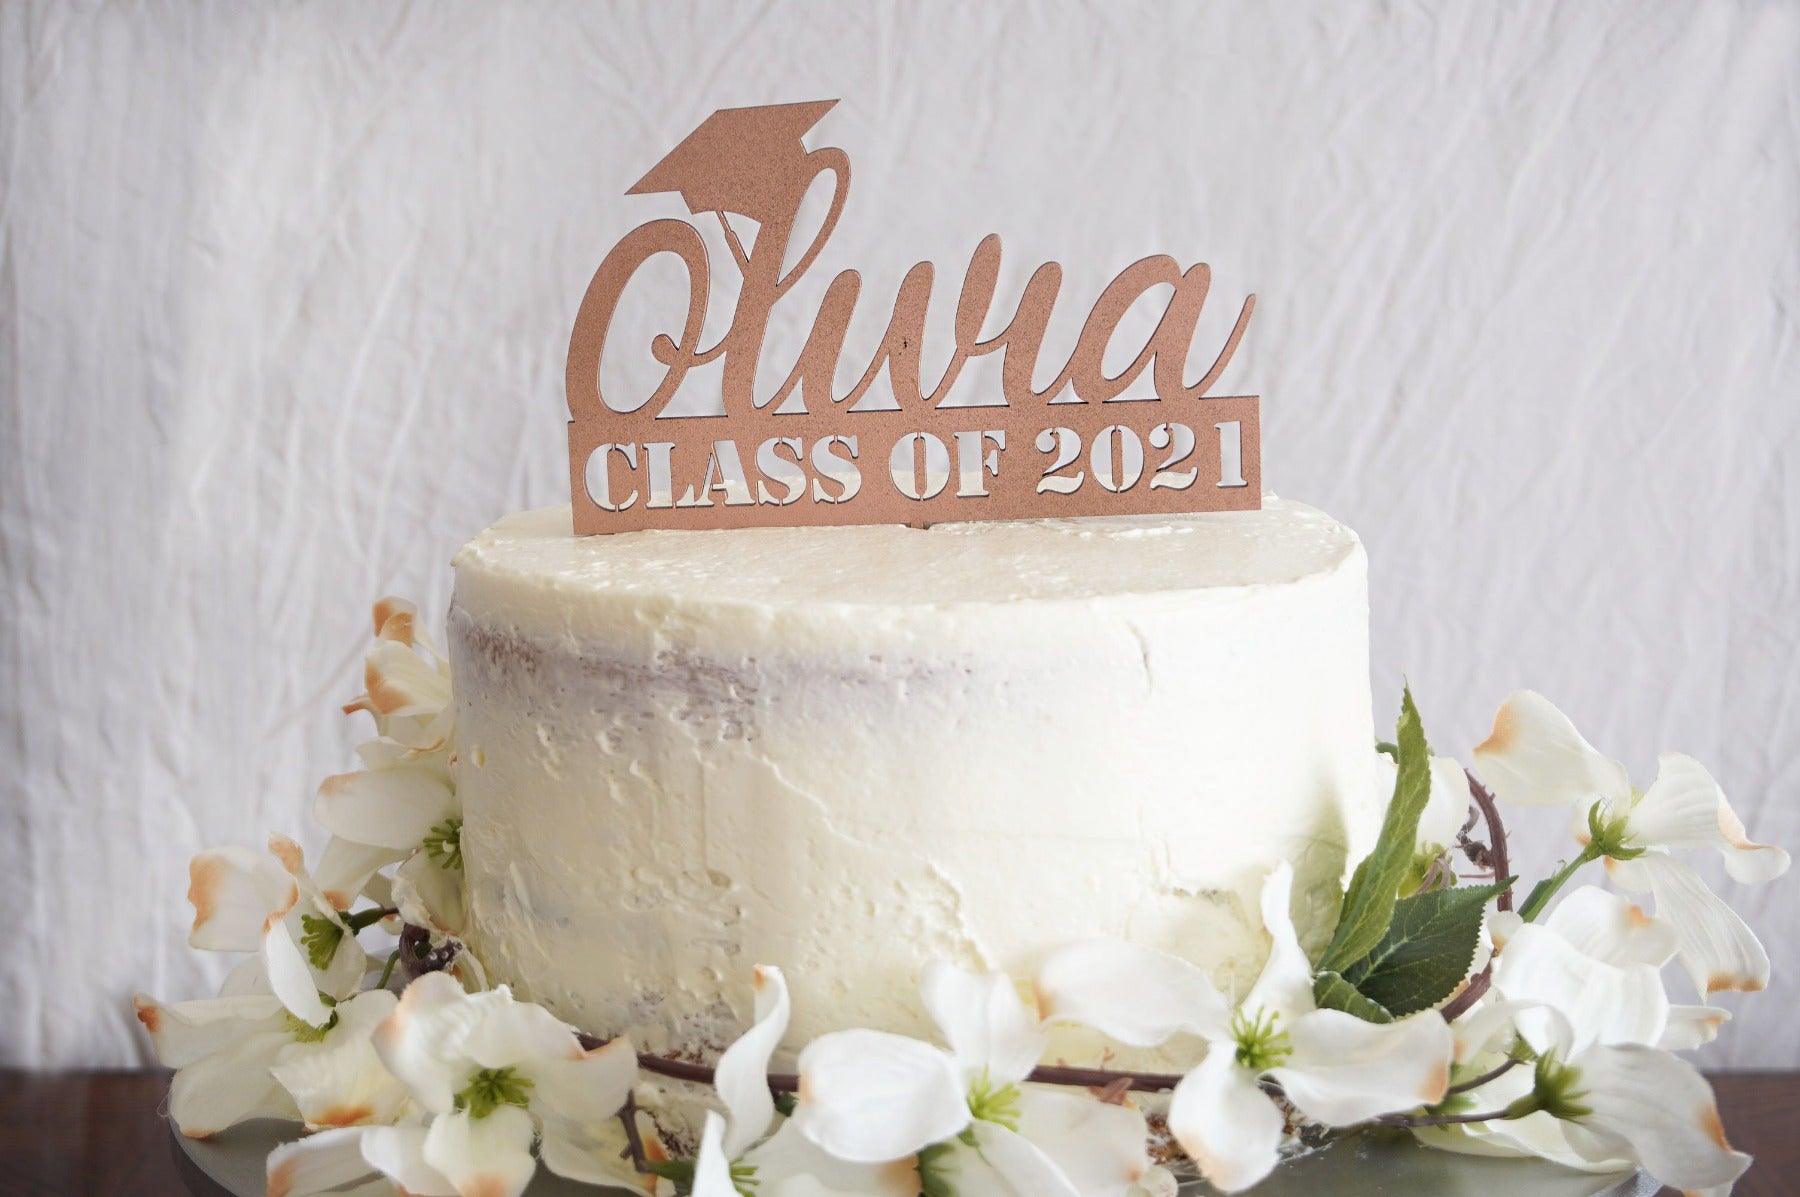 Personalized Graduation Cake Topper | Custom Congrats Class of 2021 Gift | Prom & Graduation Celebration Décor | Wood or Acrylic, Cake Toppers, designLEE Studio, designLEE Studio